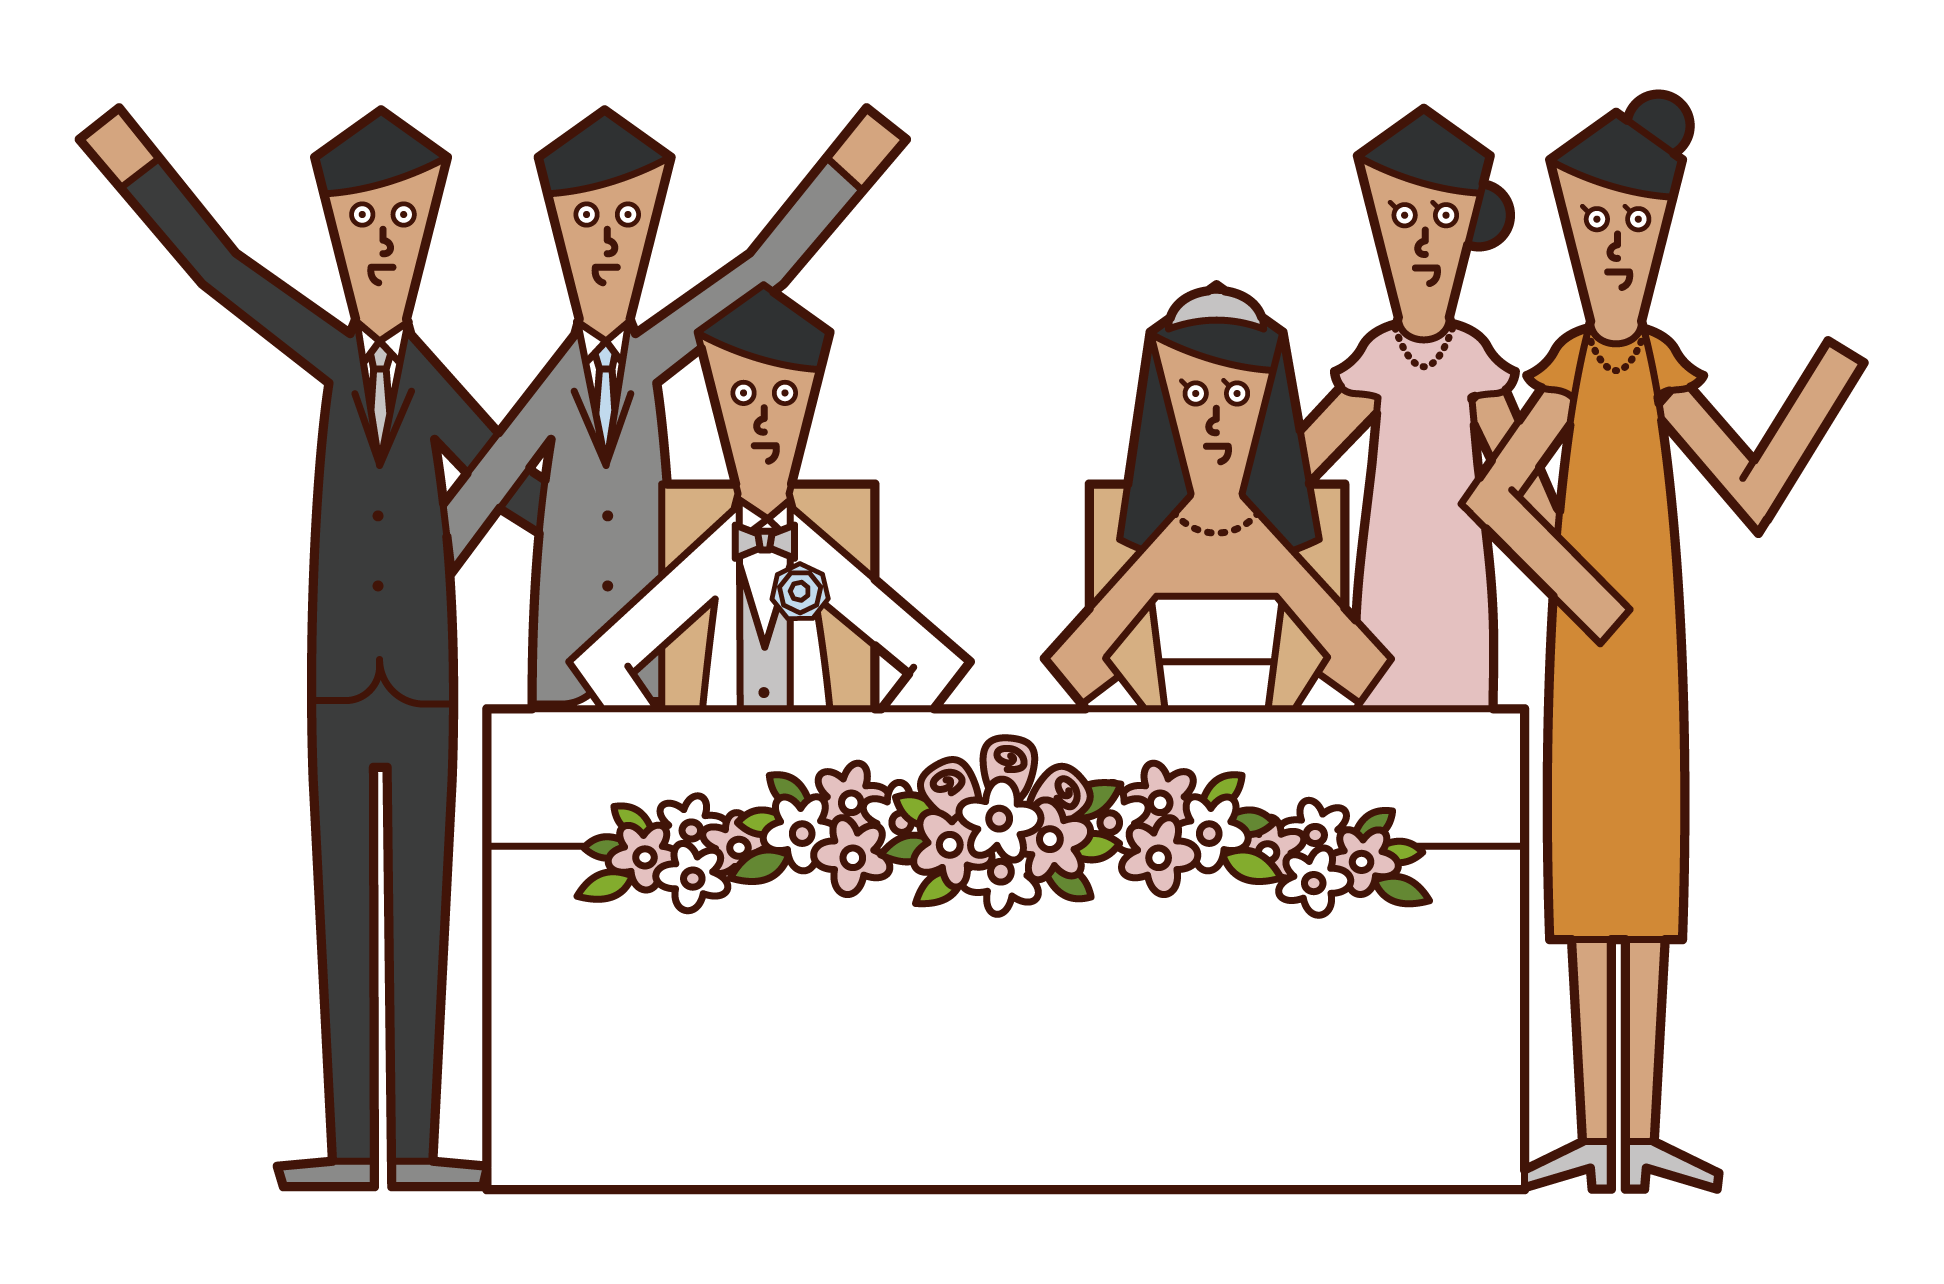 Illustration of friends taking pictures with bride and groom